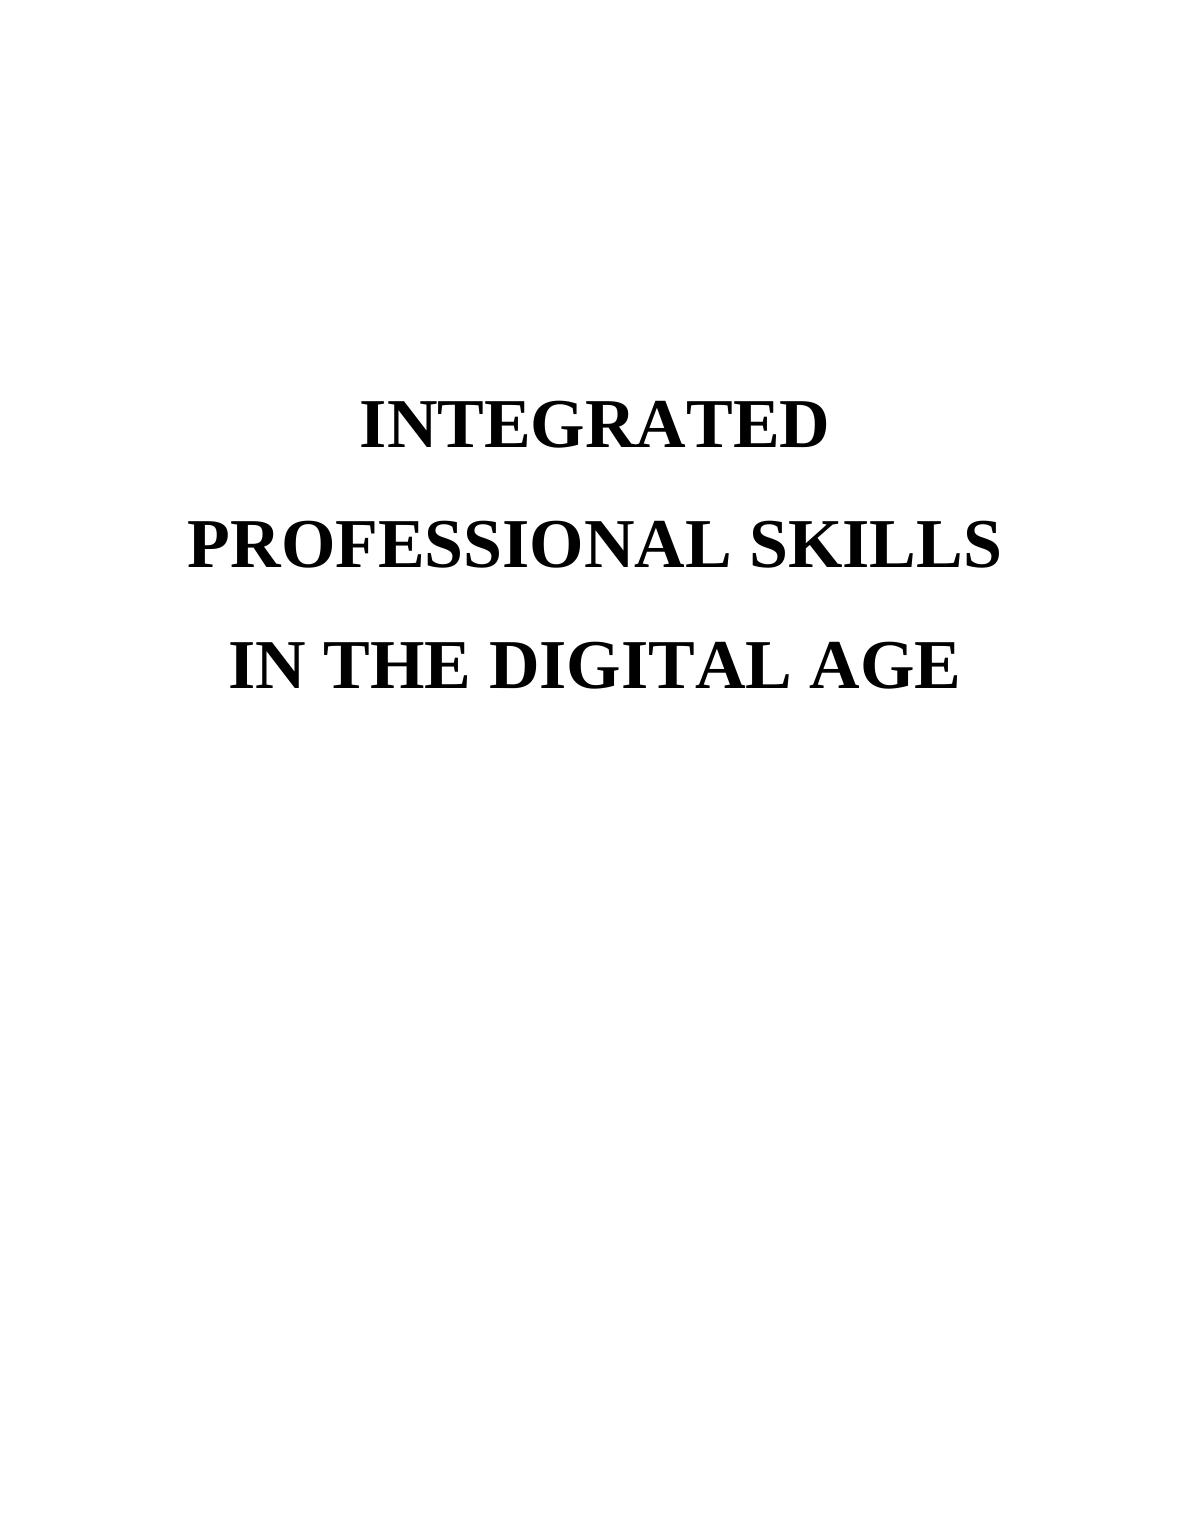 Integrated Professional Skills in the Digital Age - (pdf)_1